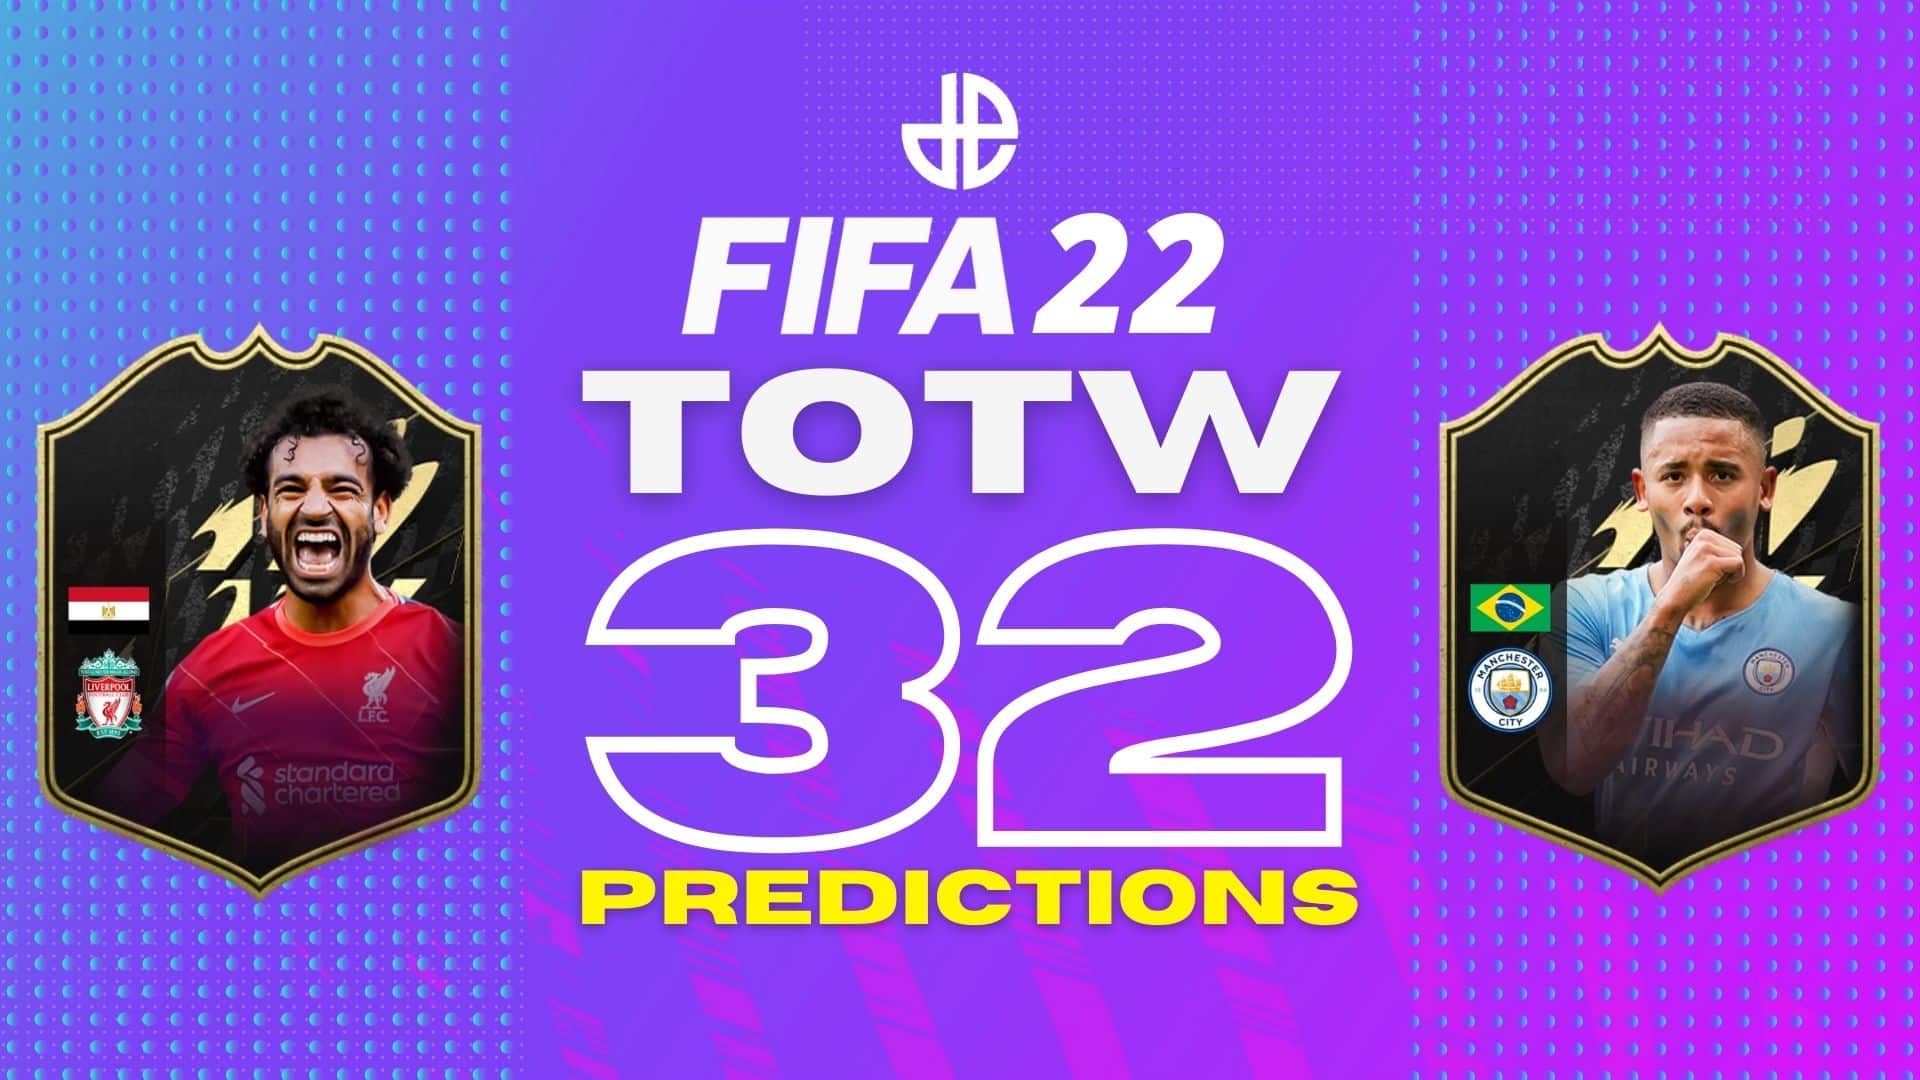 FIFA 22 TOTW 32 predictions and cards